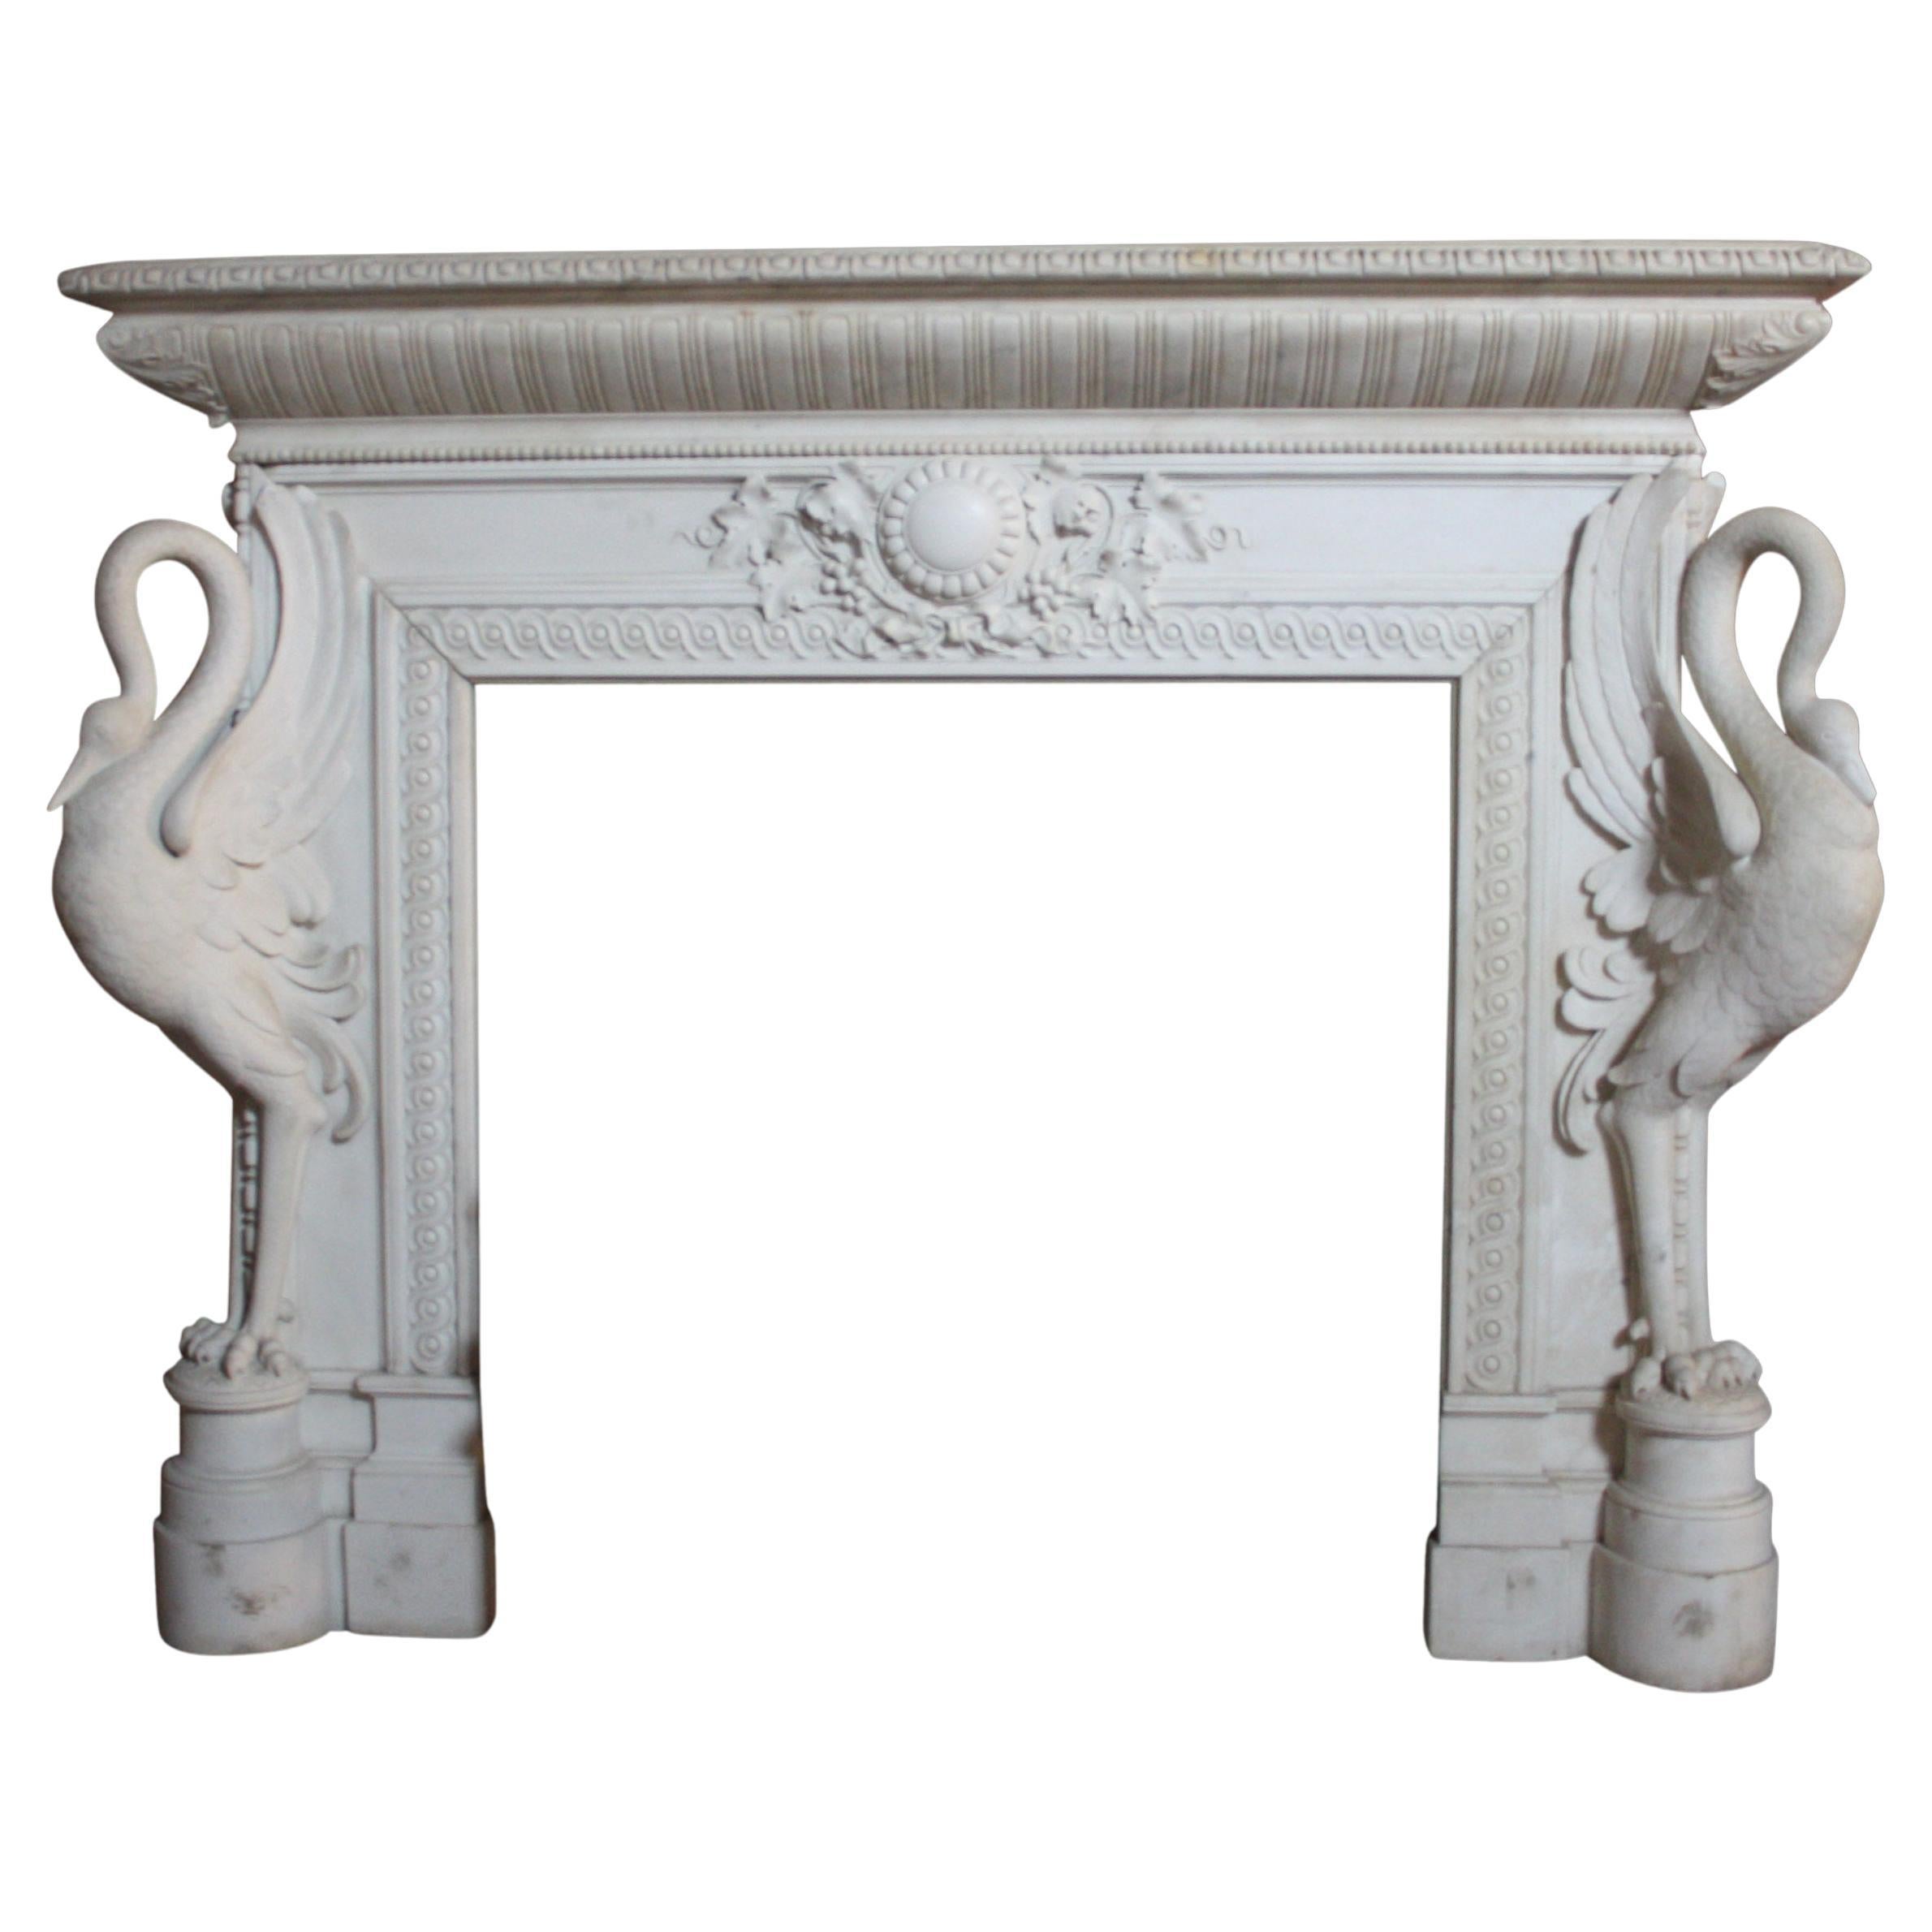 Rare and Exceptional 19th Century Italian Chimneypiece in Statuary Marble For Sale